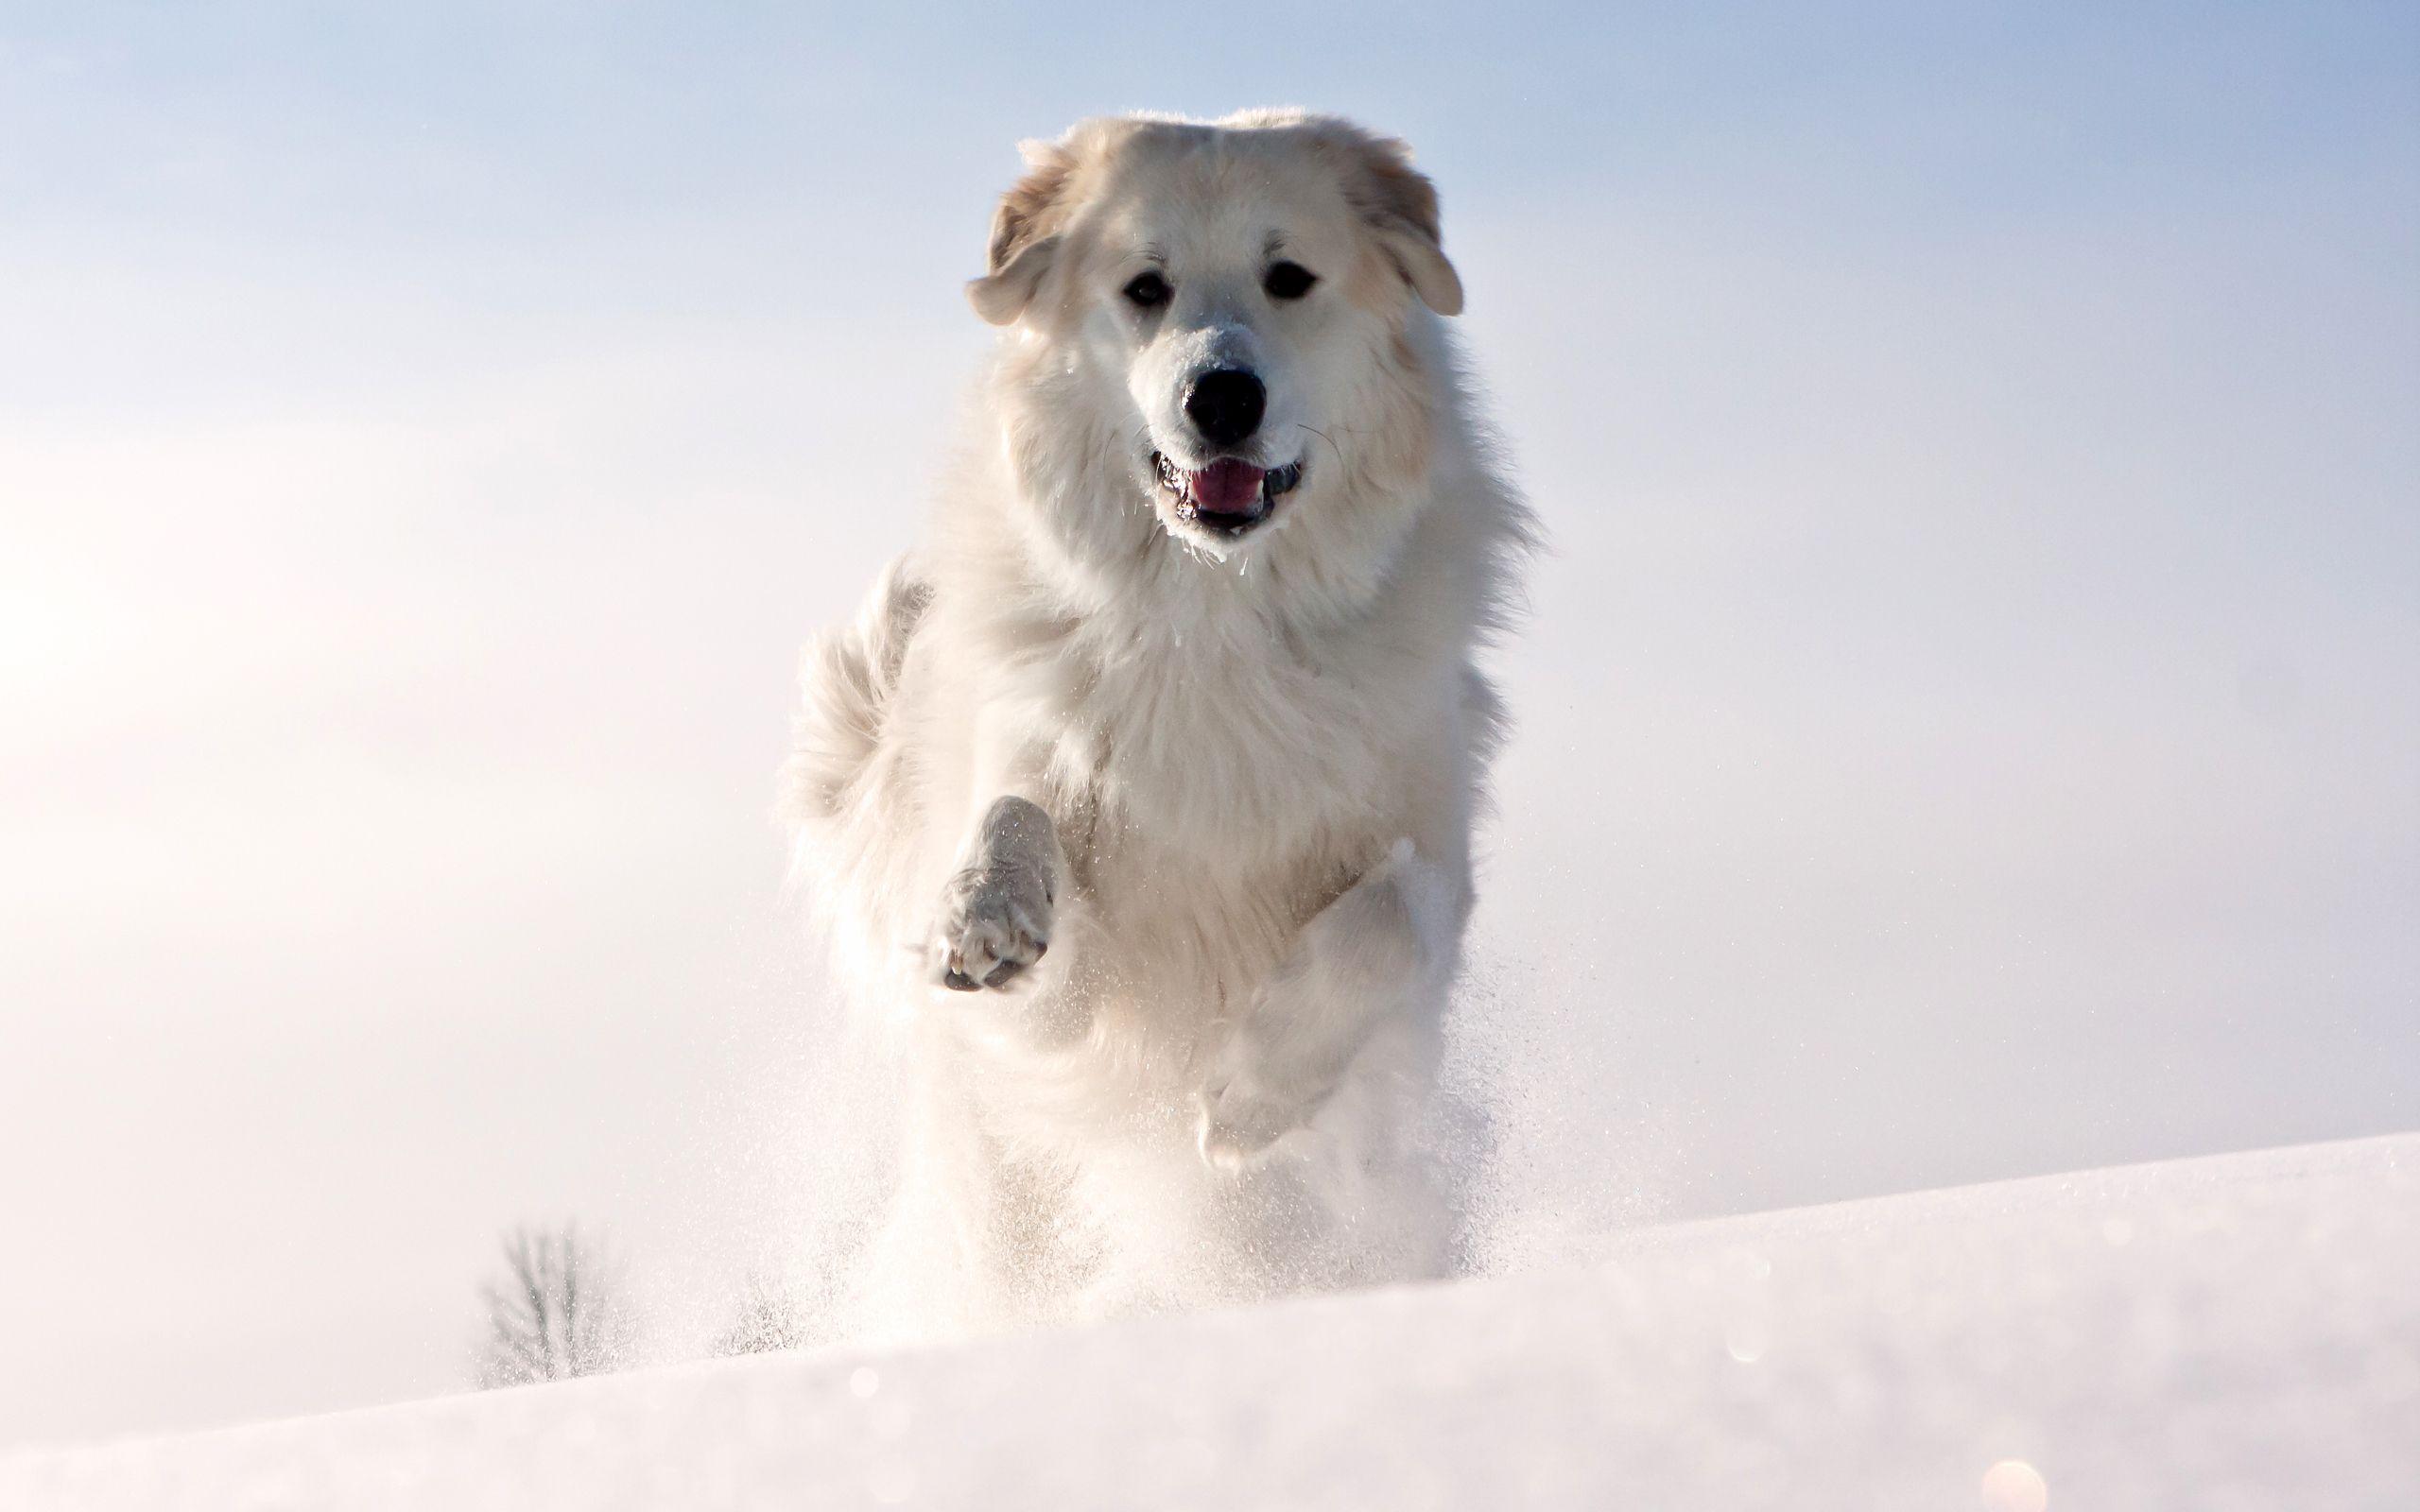 HD Snow Dog Wallpaper. Download Free. Snow dogs